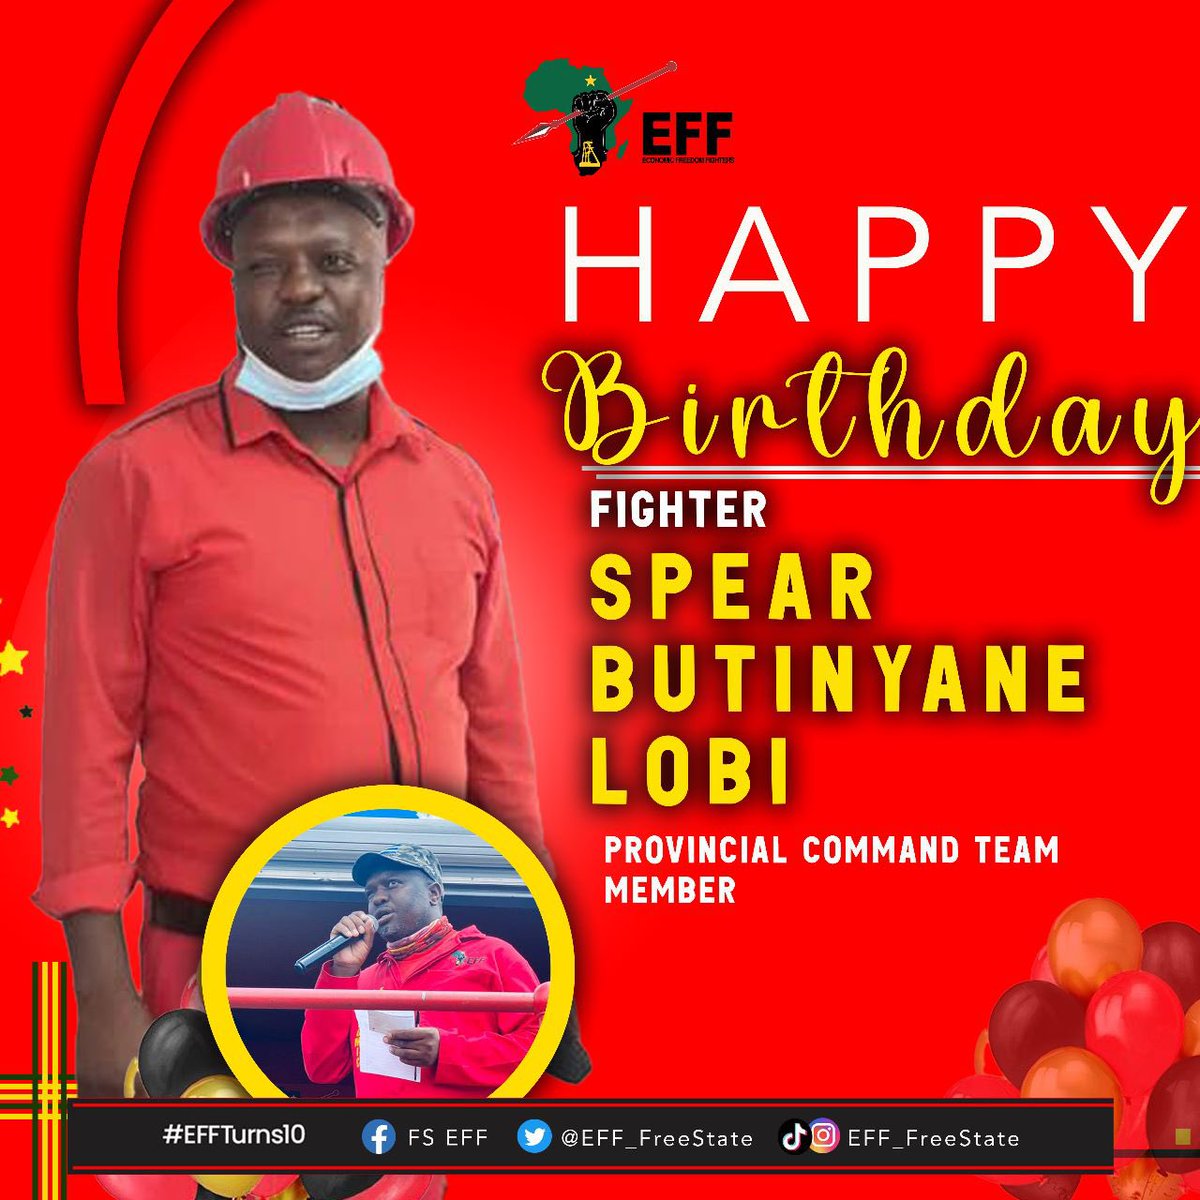 We would like to wish our PCT Member, Fighter Spear Butinyane Lobi A Revolutionary Happy Birthday.

We wish him long life, good health and Economic Freedom in his Lifetime.

Happy Birthday Leadership